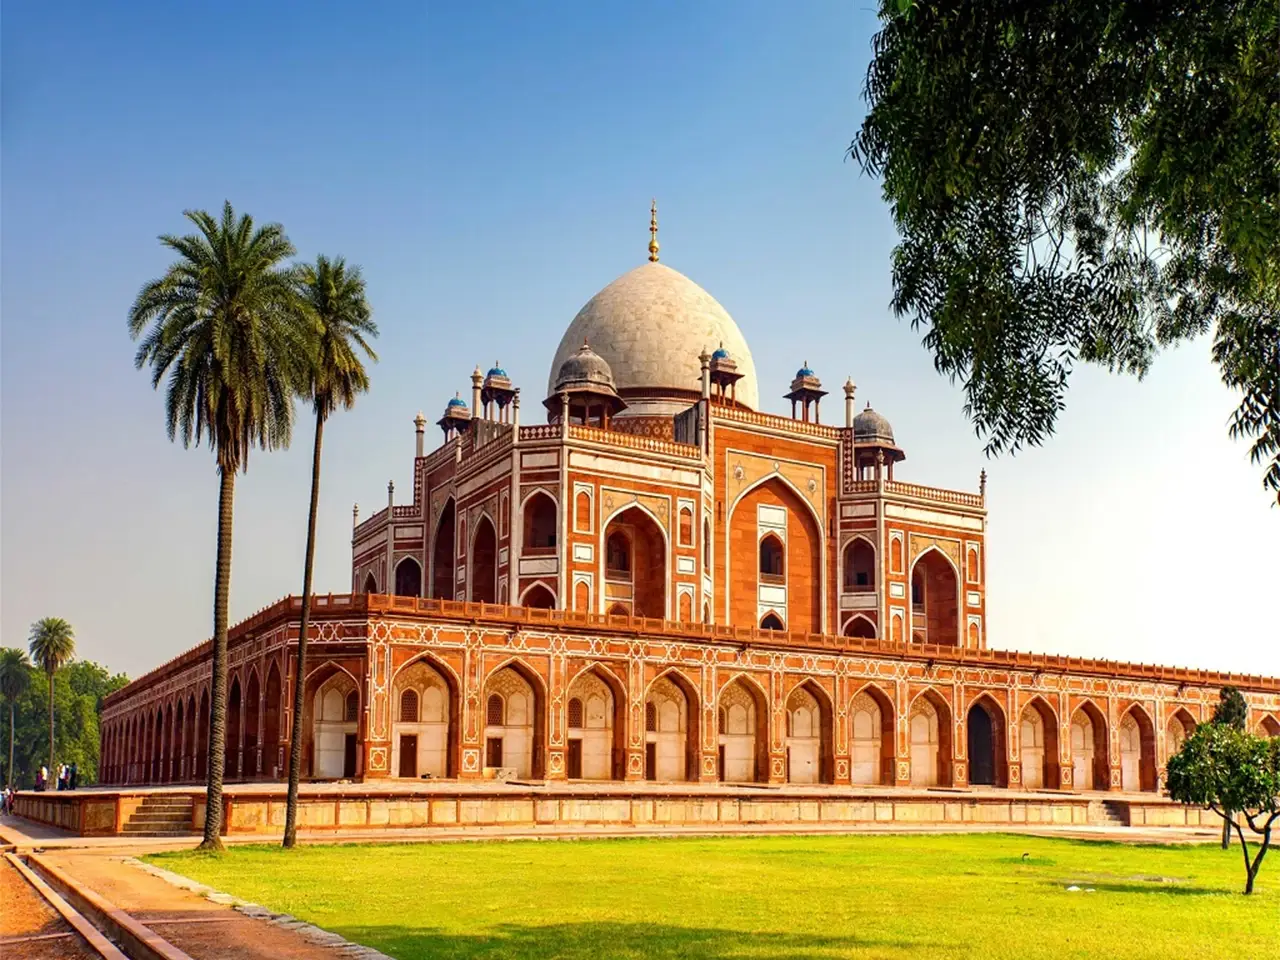 The magnificent Tomb Garden of Humayun is located near the bank of the Yamuna river in Delhi.